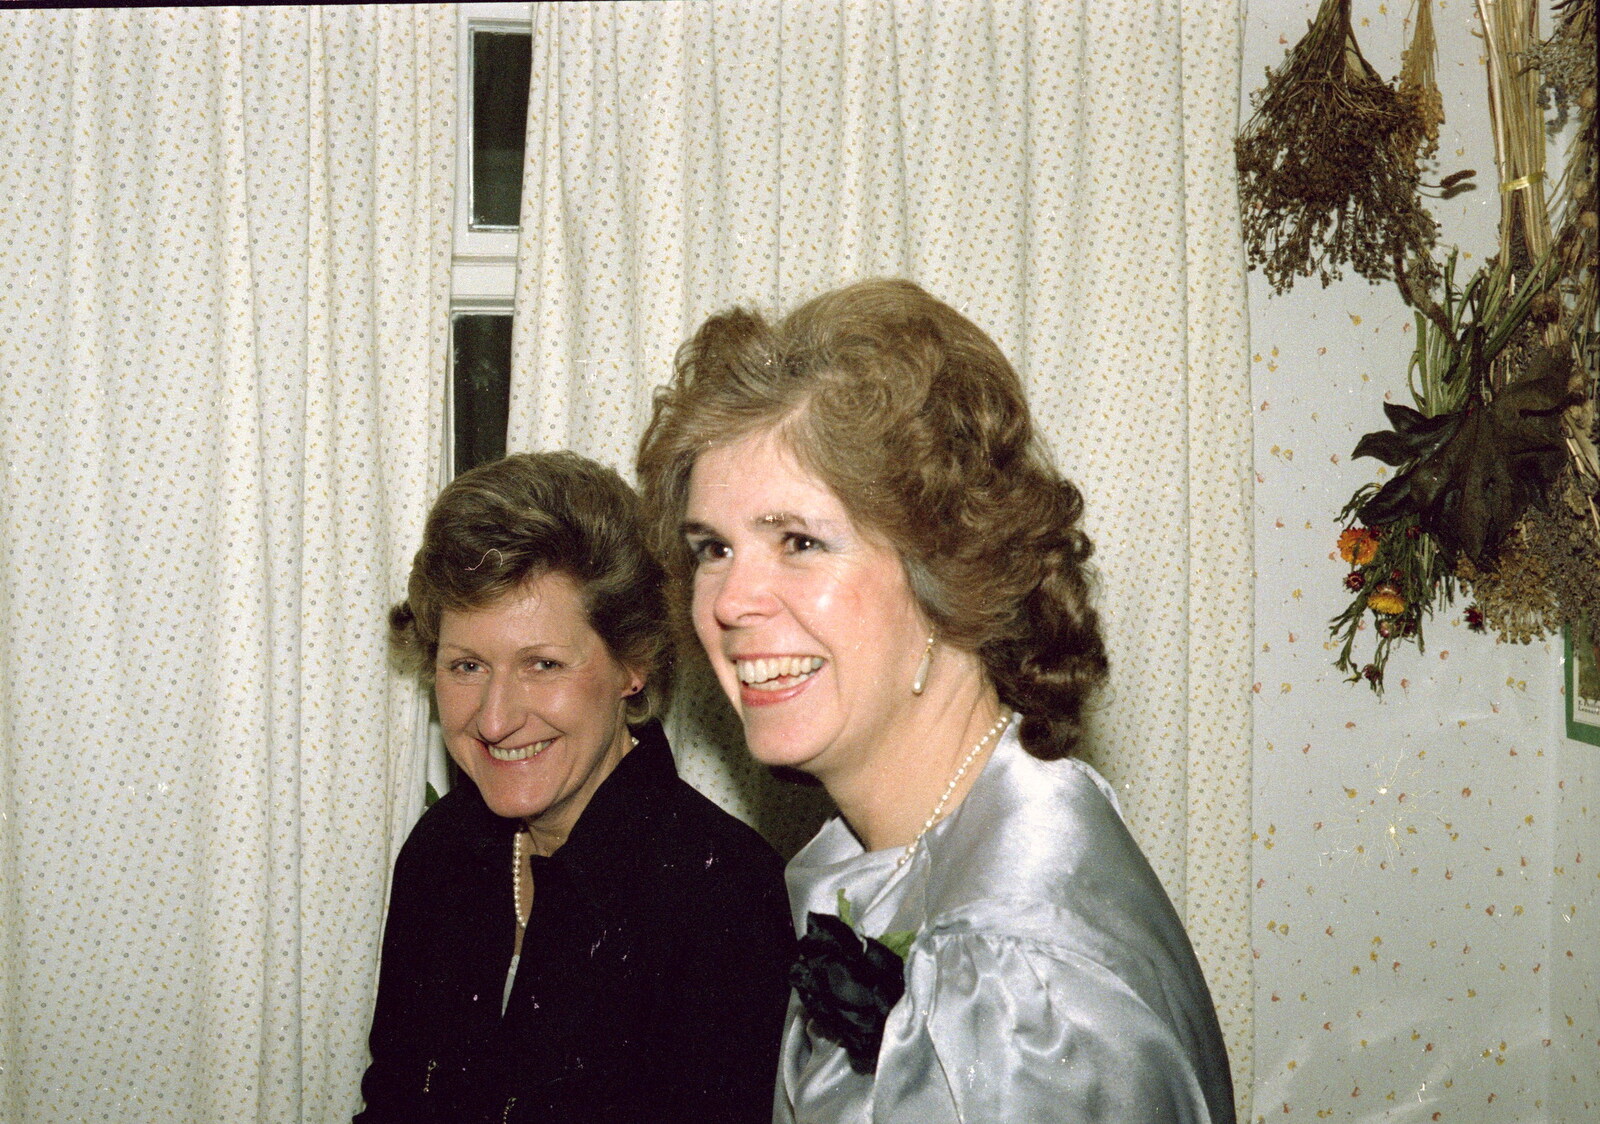 Anna'a mother and Bernice from New Year's Eve at Anna's, Walkford, Dorset - 31st December 1985